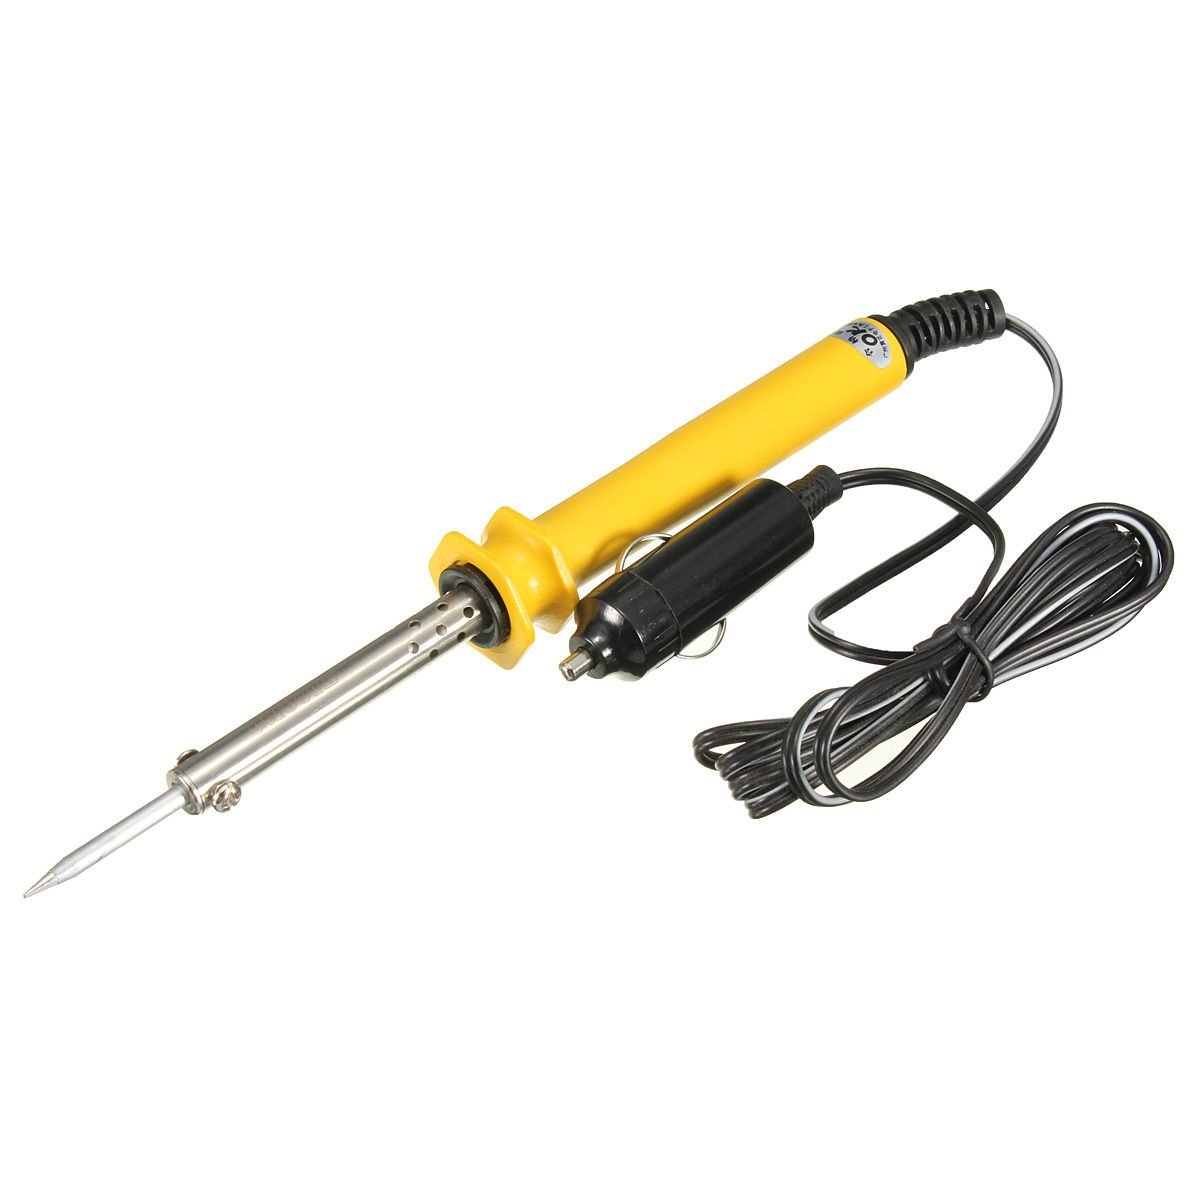 GJ-DC-12V-30W-Low-Voltage-Bevel-eEectric-Soldering-Iron-Fitted-with-Cigarette-Lighter-Plug-for-Auto--1135259-1